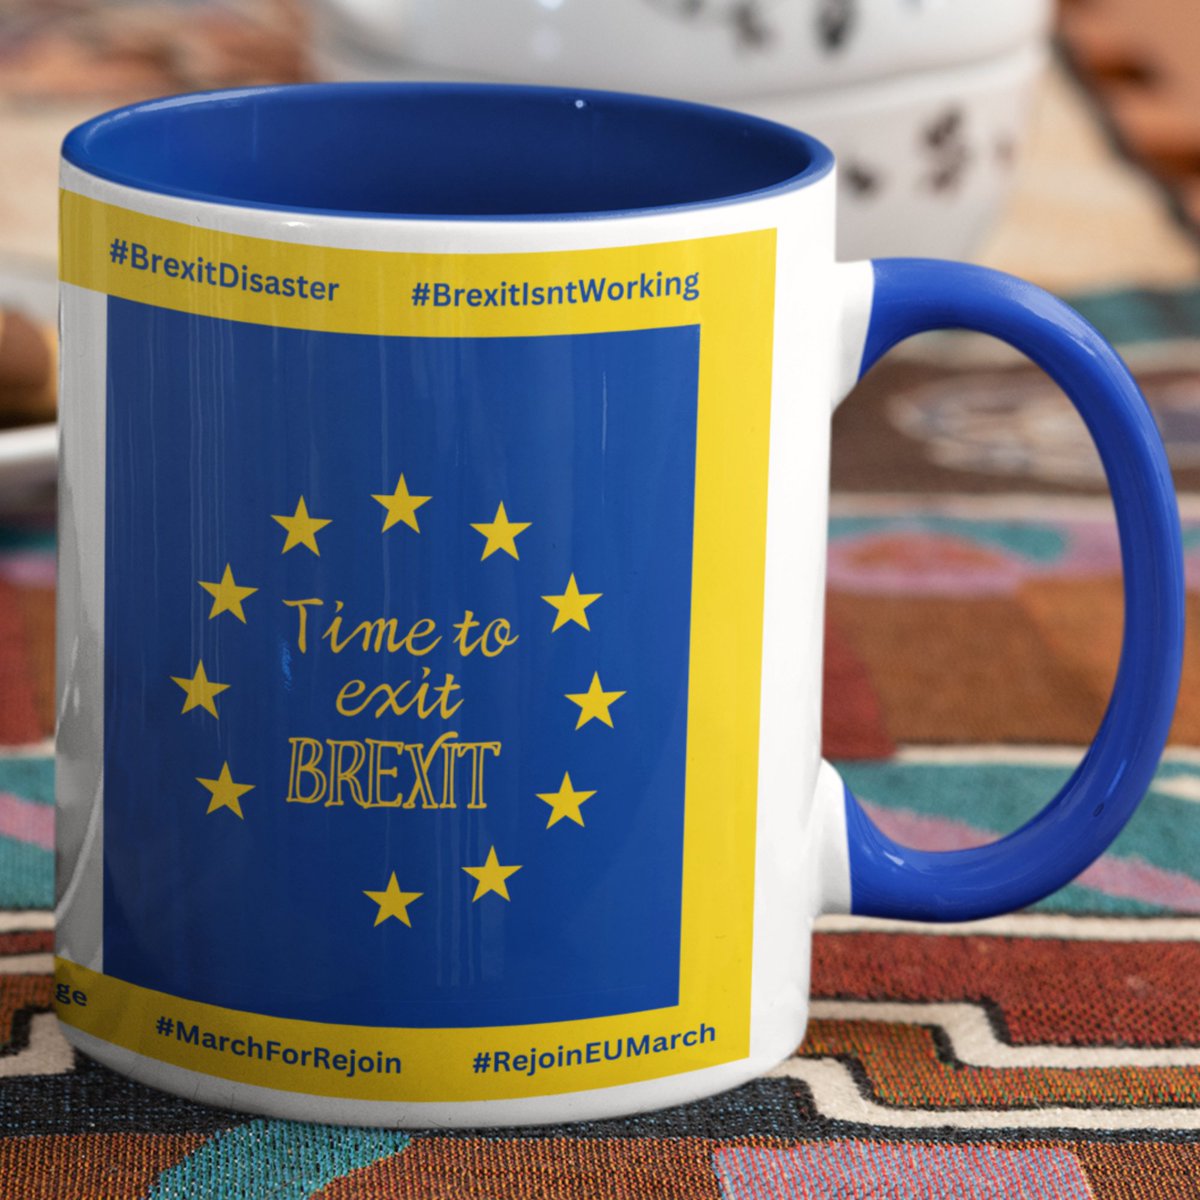 Newly launched: #Brexit #coffee #mugs for #coffeelovers . Visit: BrewedBlissBoutique.etsy.com to see the full choice. #stopbrexit #RejoinEU #rejoineumarch #rejoinmarch #BrexitHasFailed #BrexitDisaster #ToryBrokenBritain #ToryCriminalsUnfitToGovern  (PS: pro-Brexit mug also available)